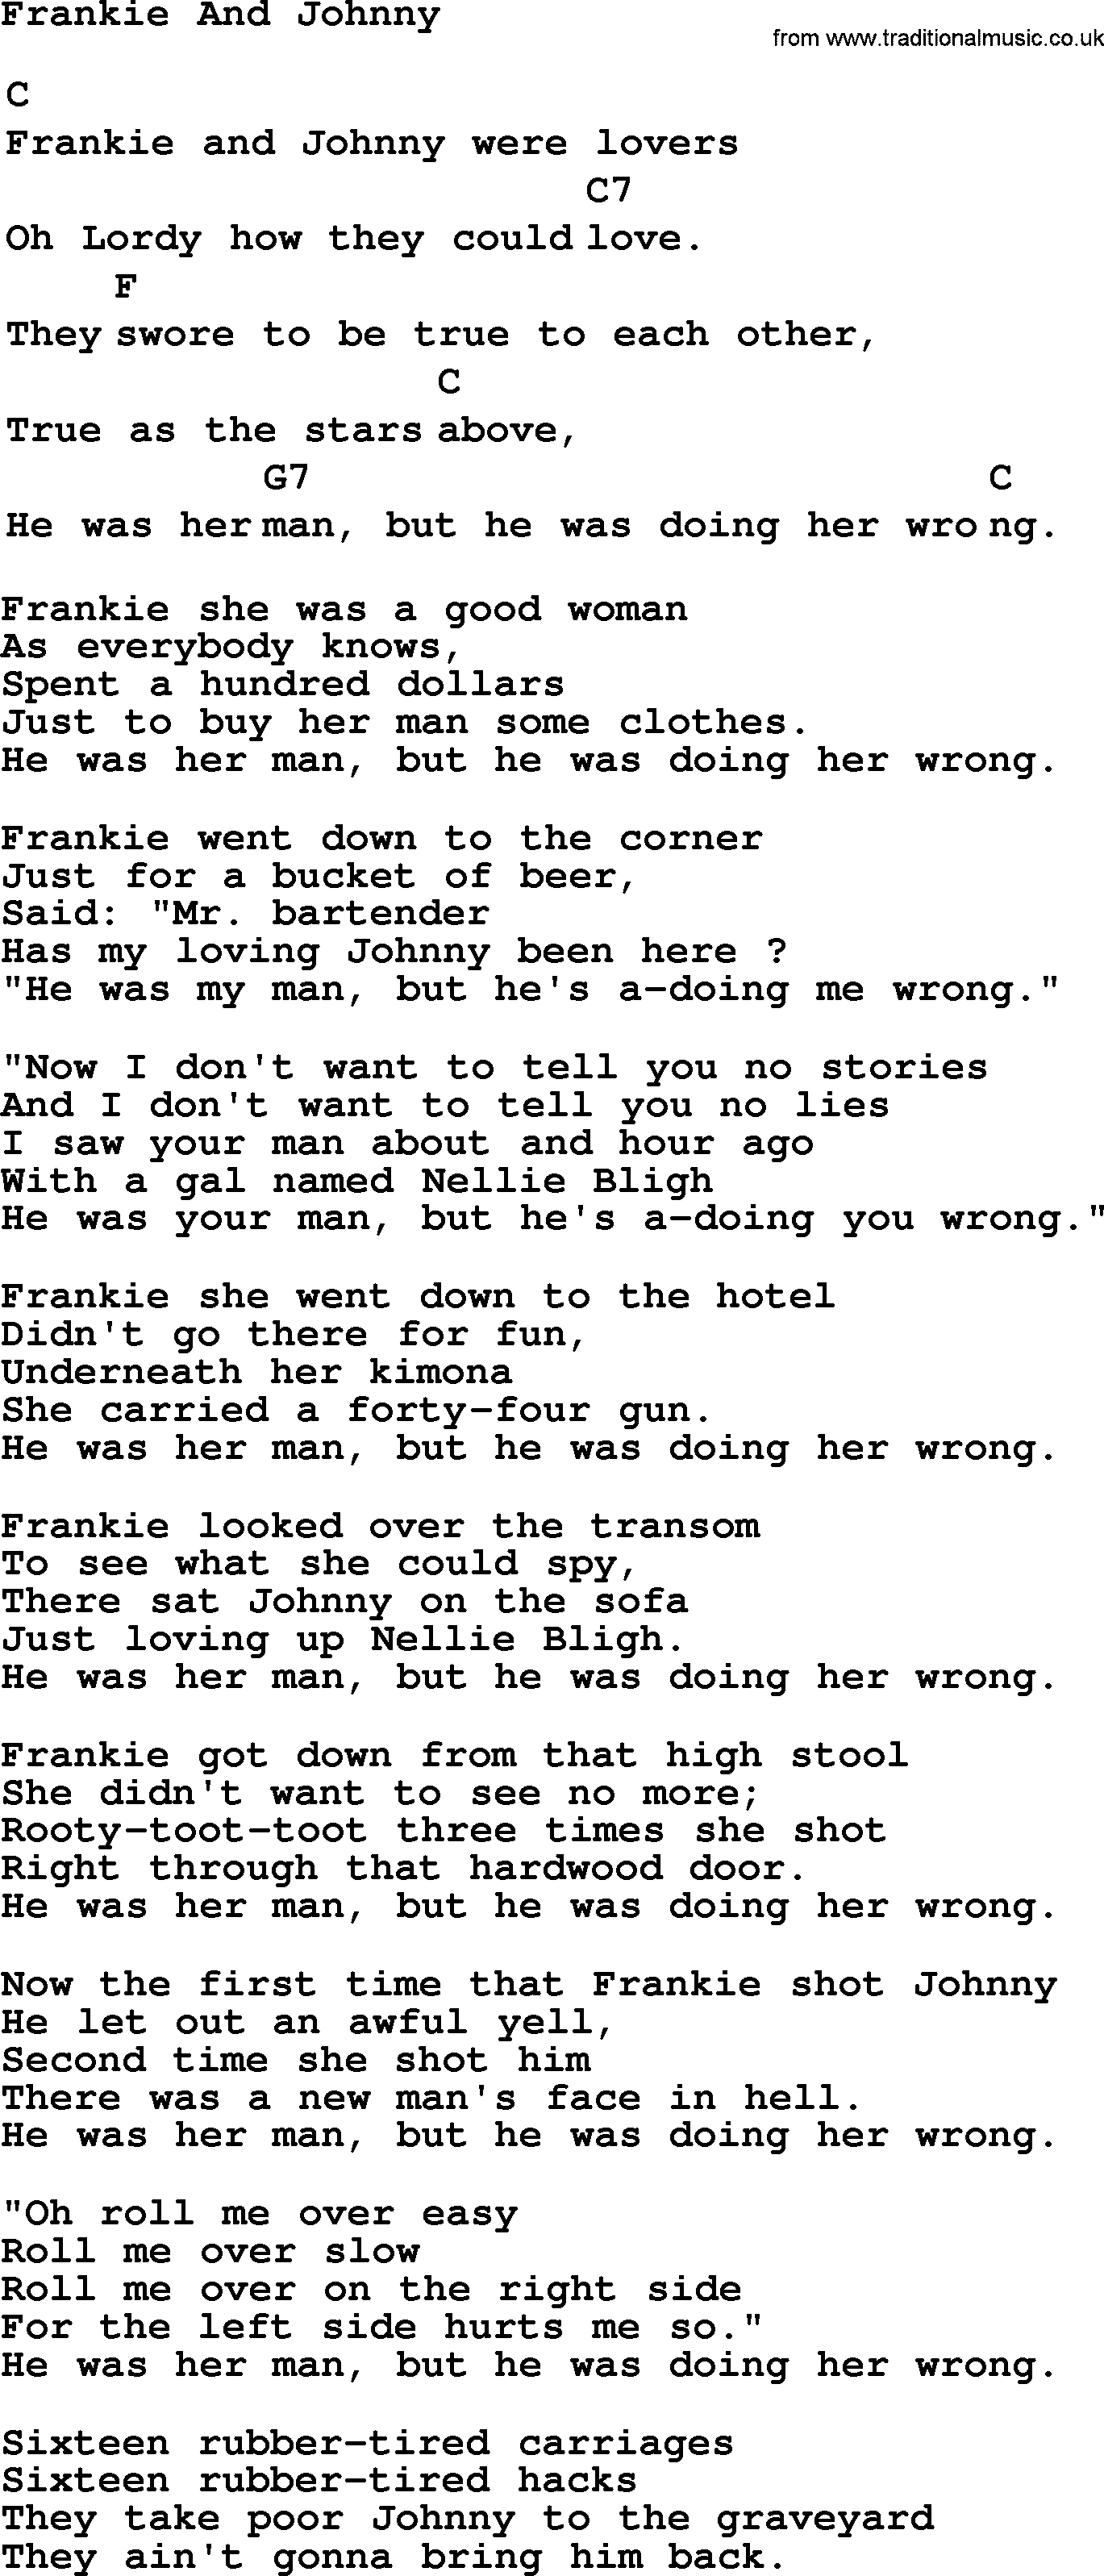 Top 1000 Most Popular Folk and Old-time Songs: Frankie And Johnny, lyrics and chords